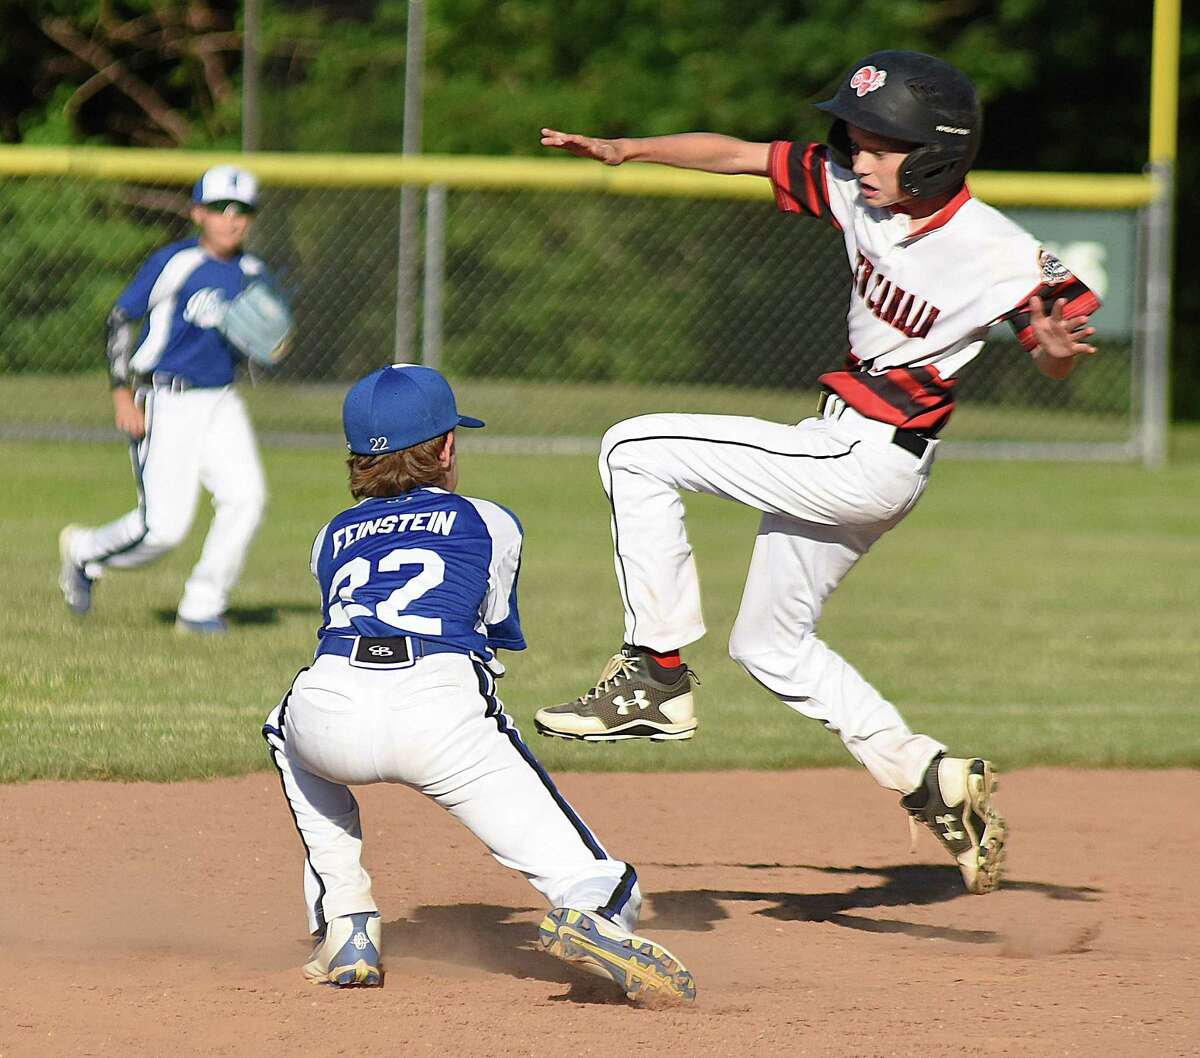 New Canaan baserunner Jack Sommers, right, goes airborne to try and avoid the tag of Norwalk's Henry Feinstein on a stolen base attempt during Wednesday's District 1 Cal Ripken 11-year-old All-Stars championship game at Tim Devine Field in Norwalk. Sommers was out on the play and Norwalk went on to post a 10-0 win.